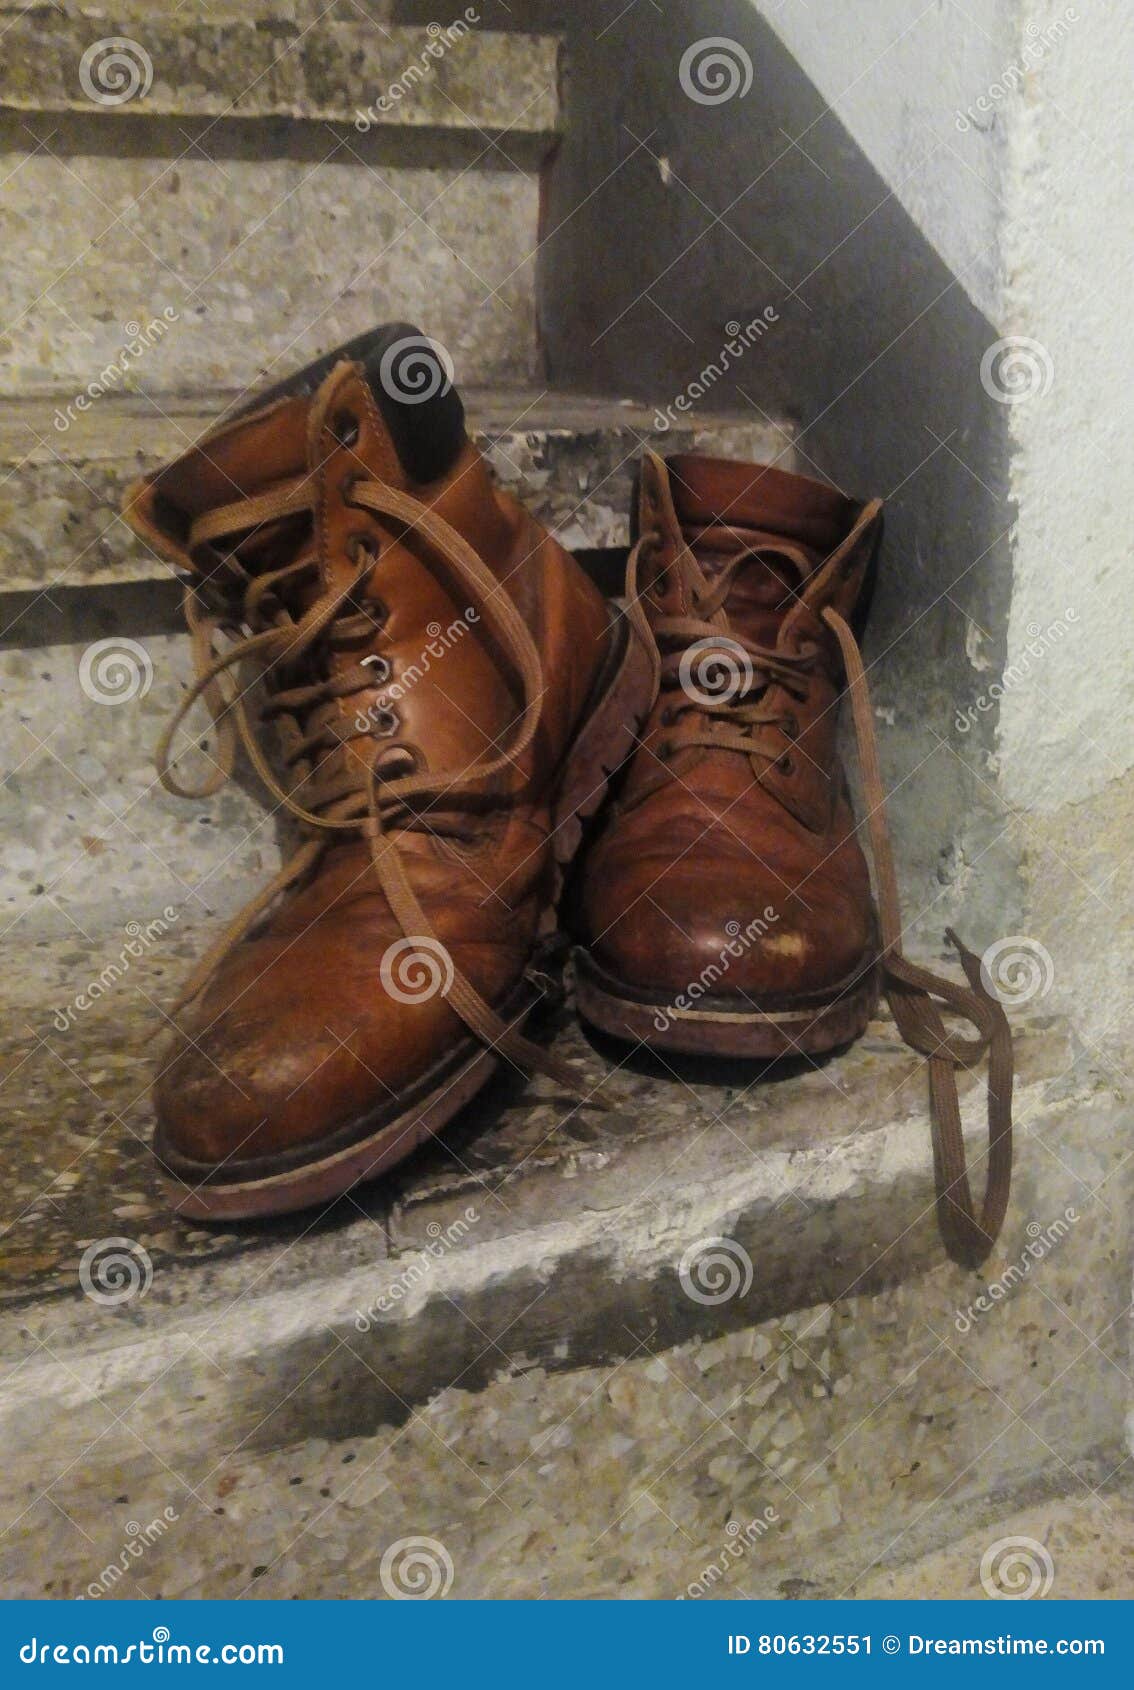 the old boots